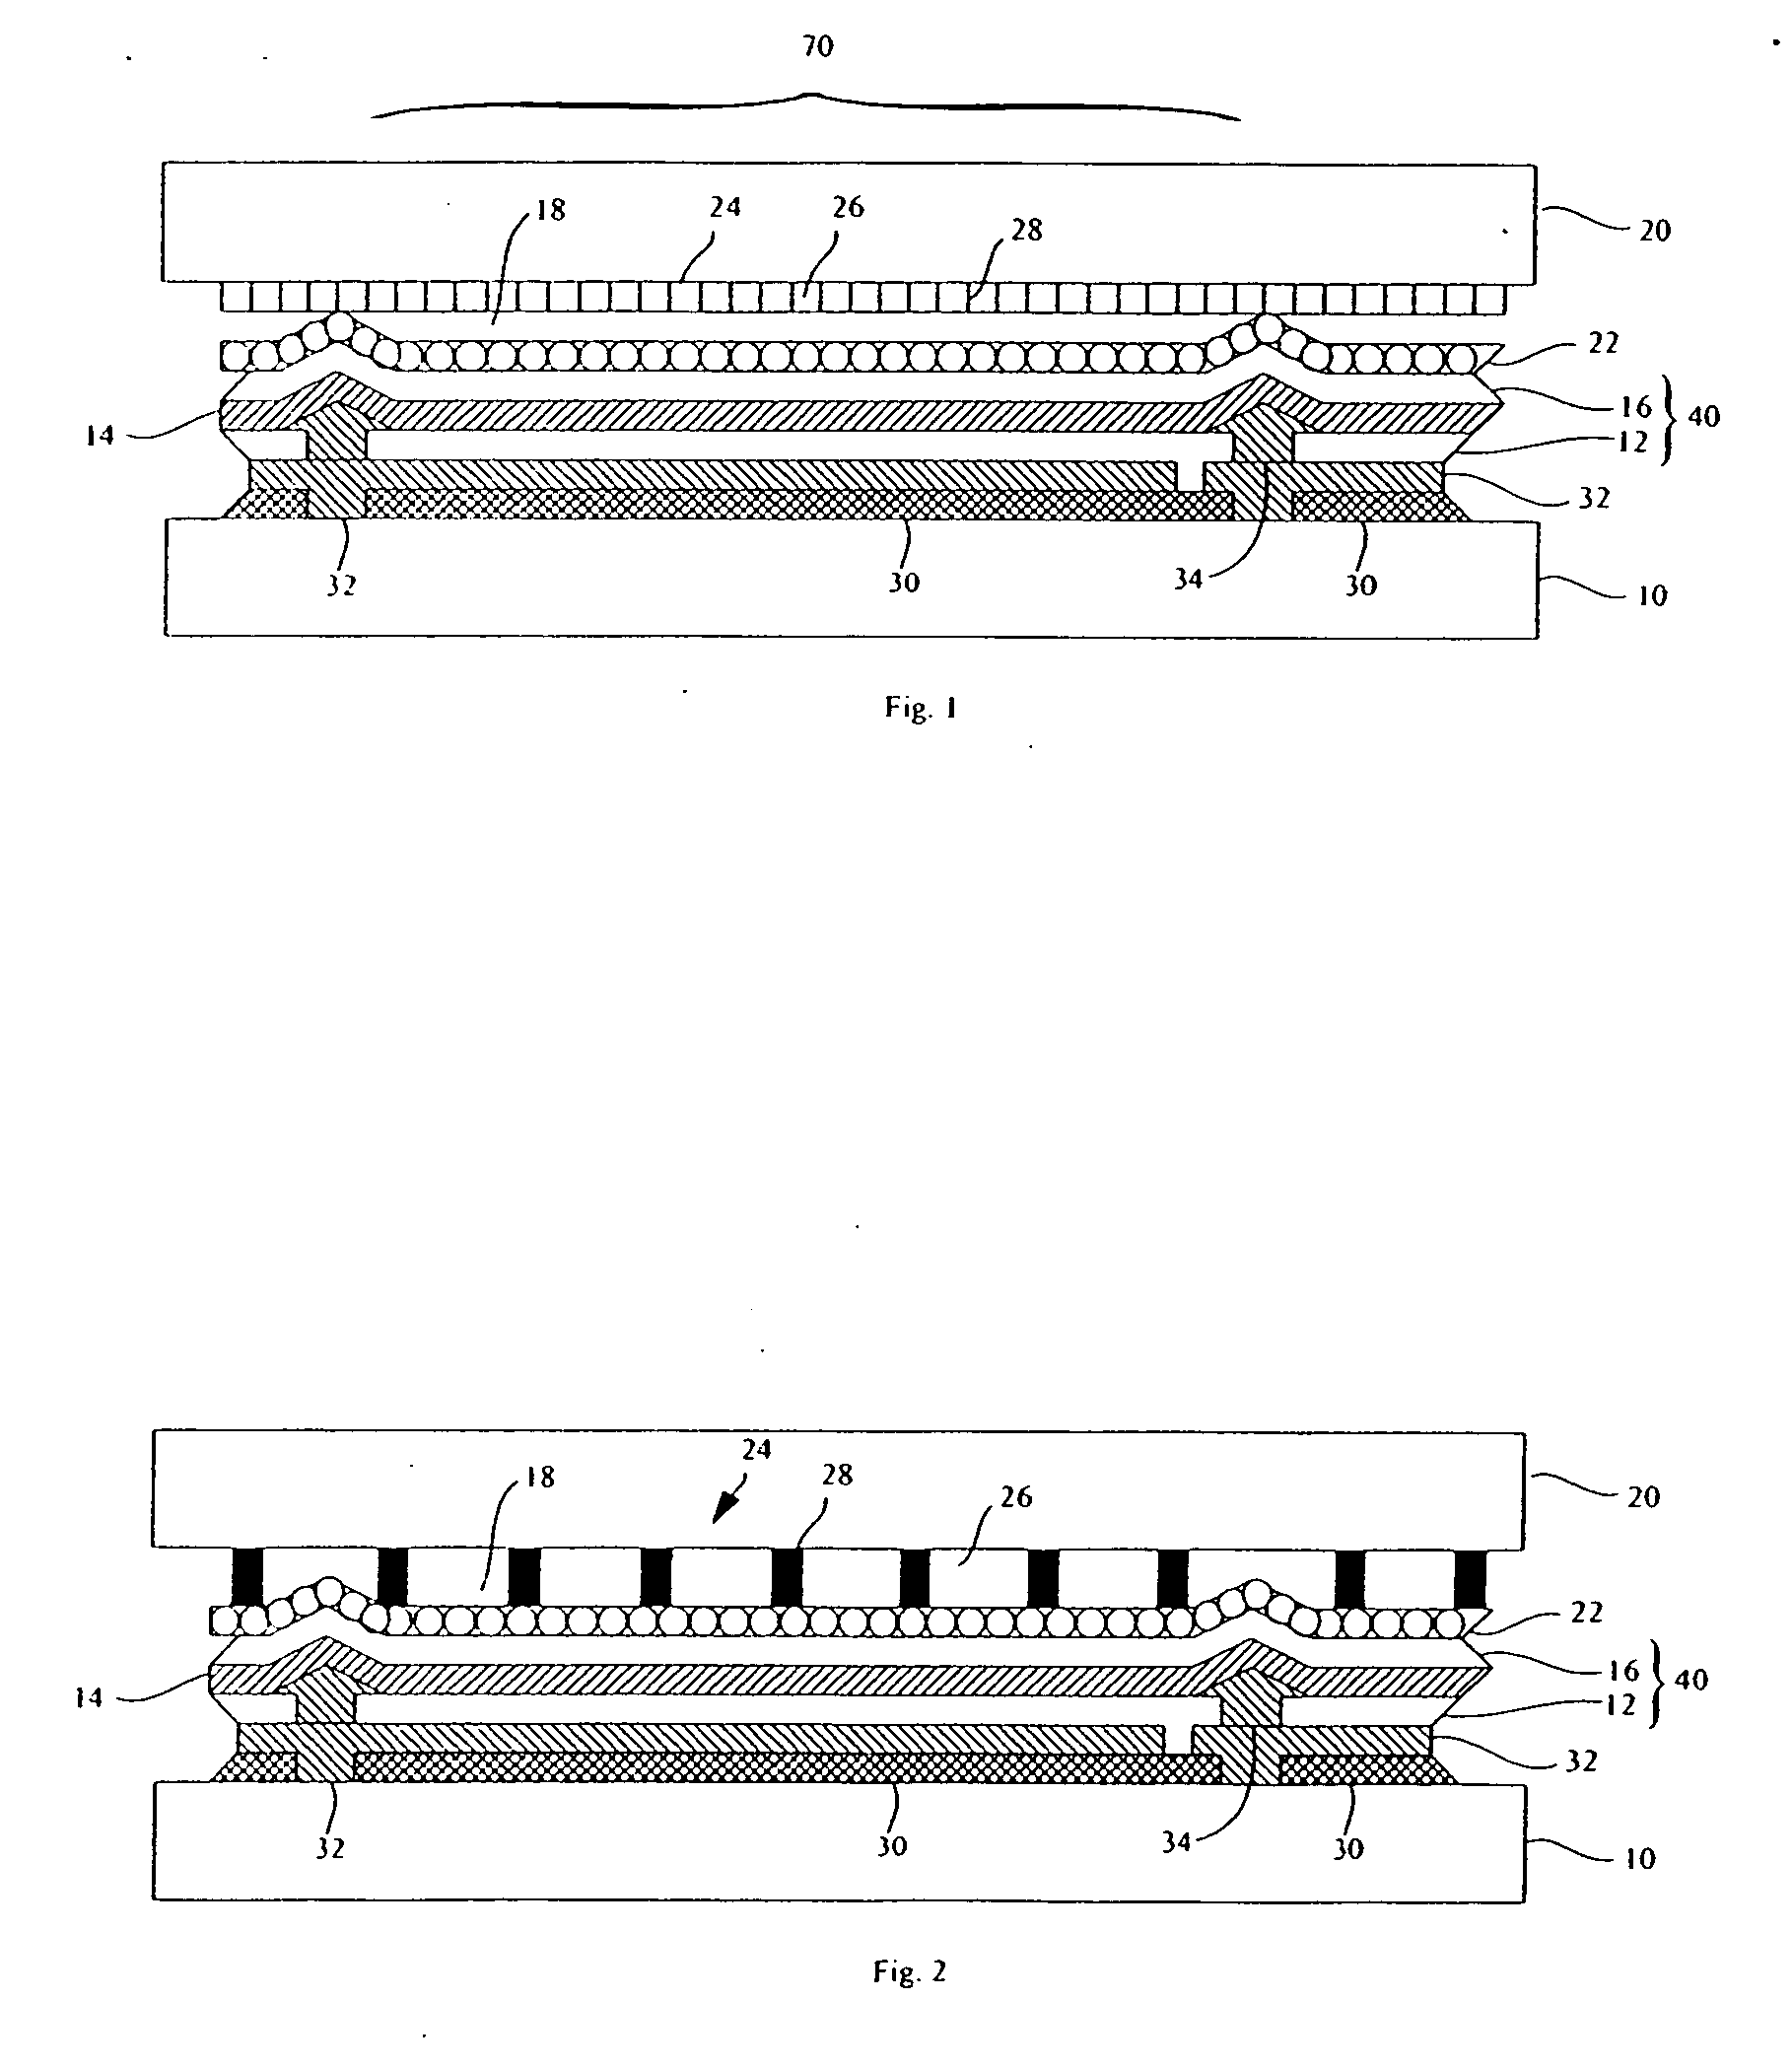 OLED device having improved output and contrast